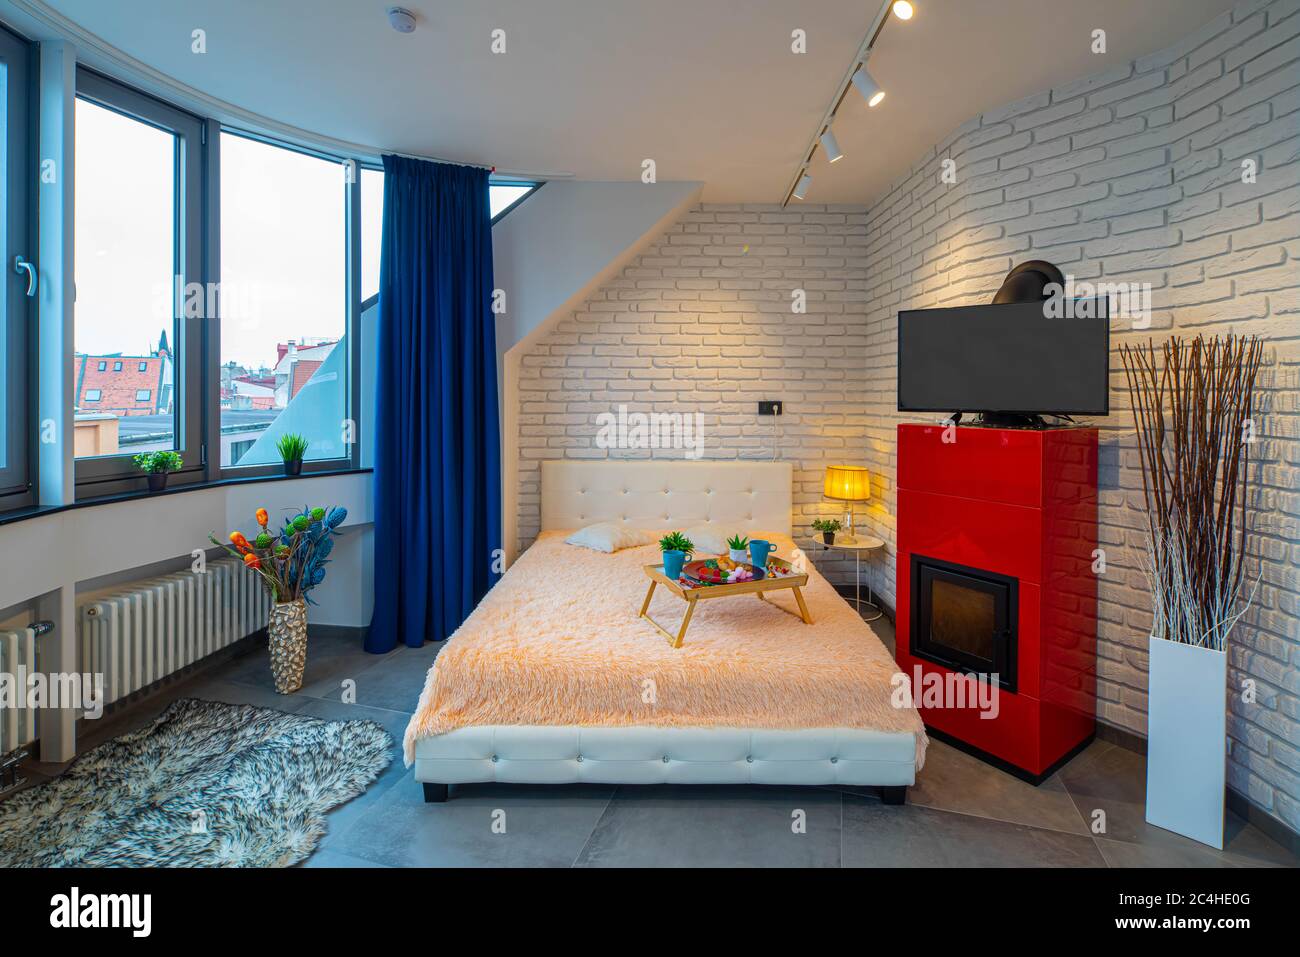 Modern loft interior of luxury studio apartment. Brick wall. Panorama window. Tray with food on the bed. TV on the fireplace. Front view. Stock Photo